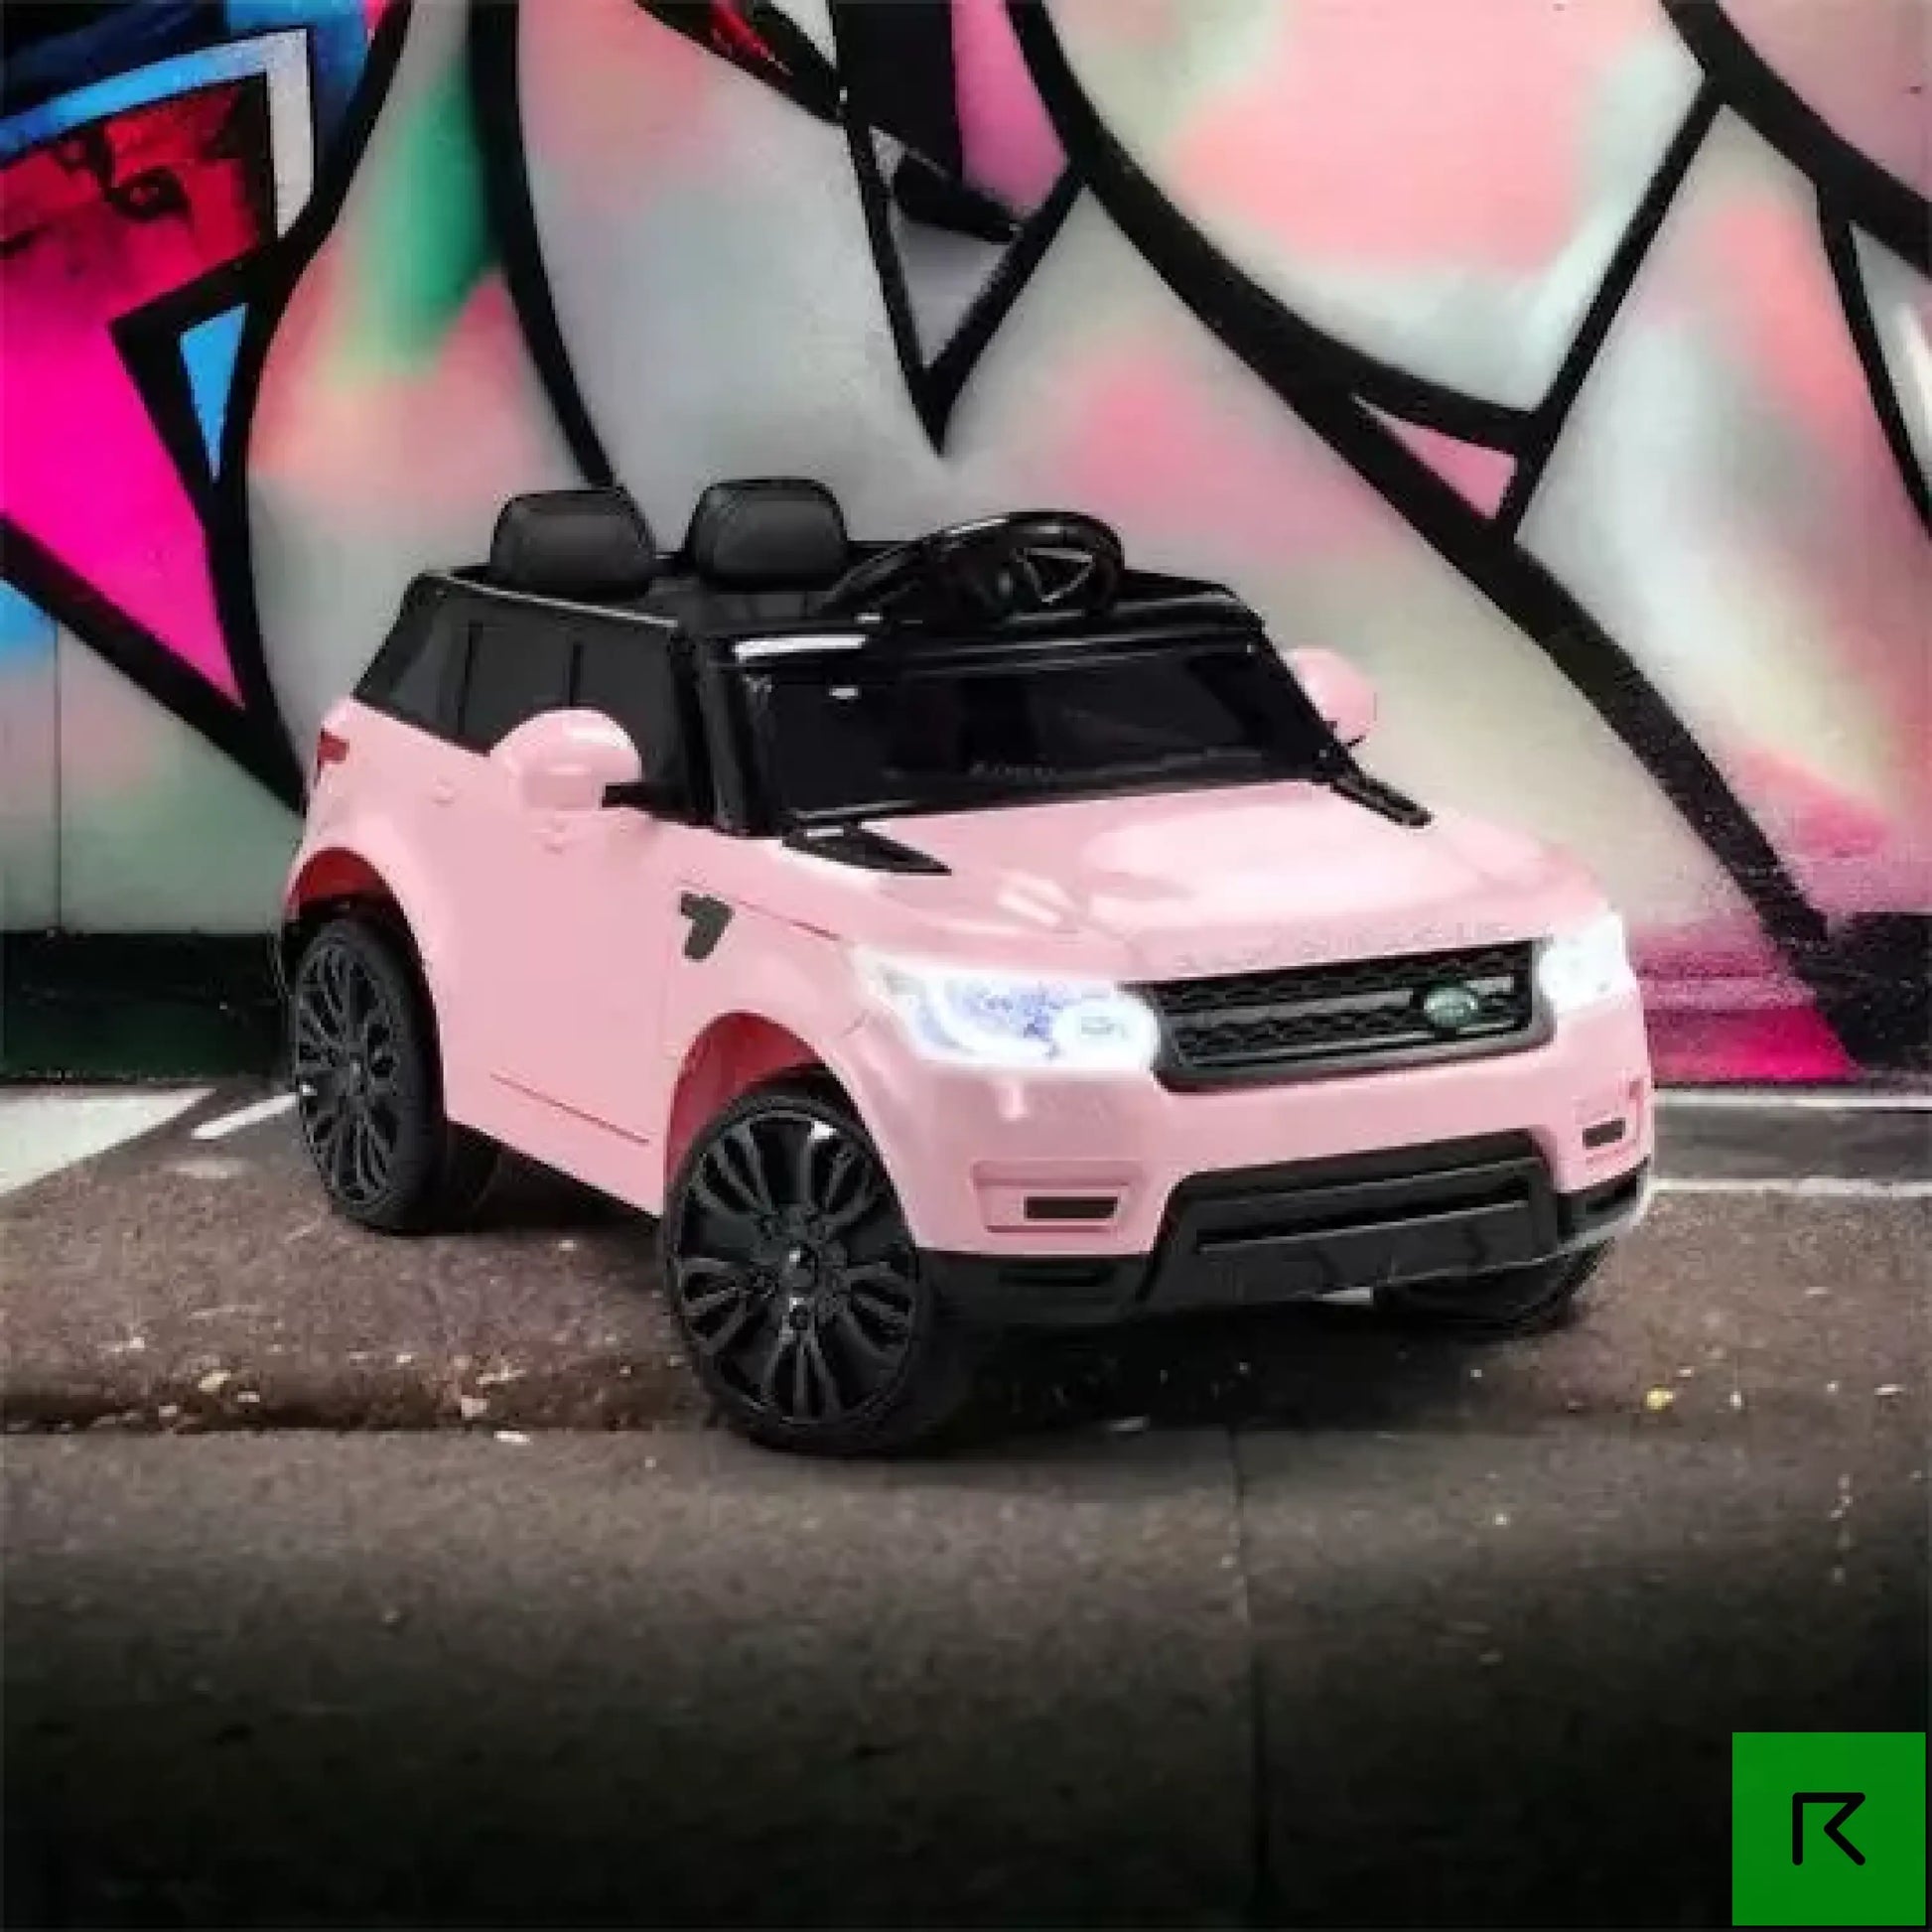 Range Rover Inspired Kids Ride On Car with Remote Control |